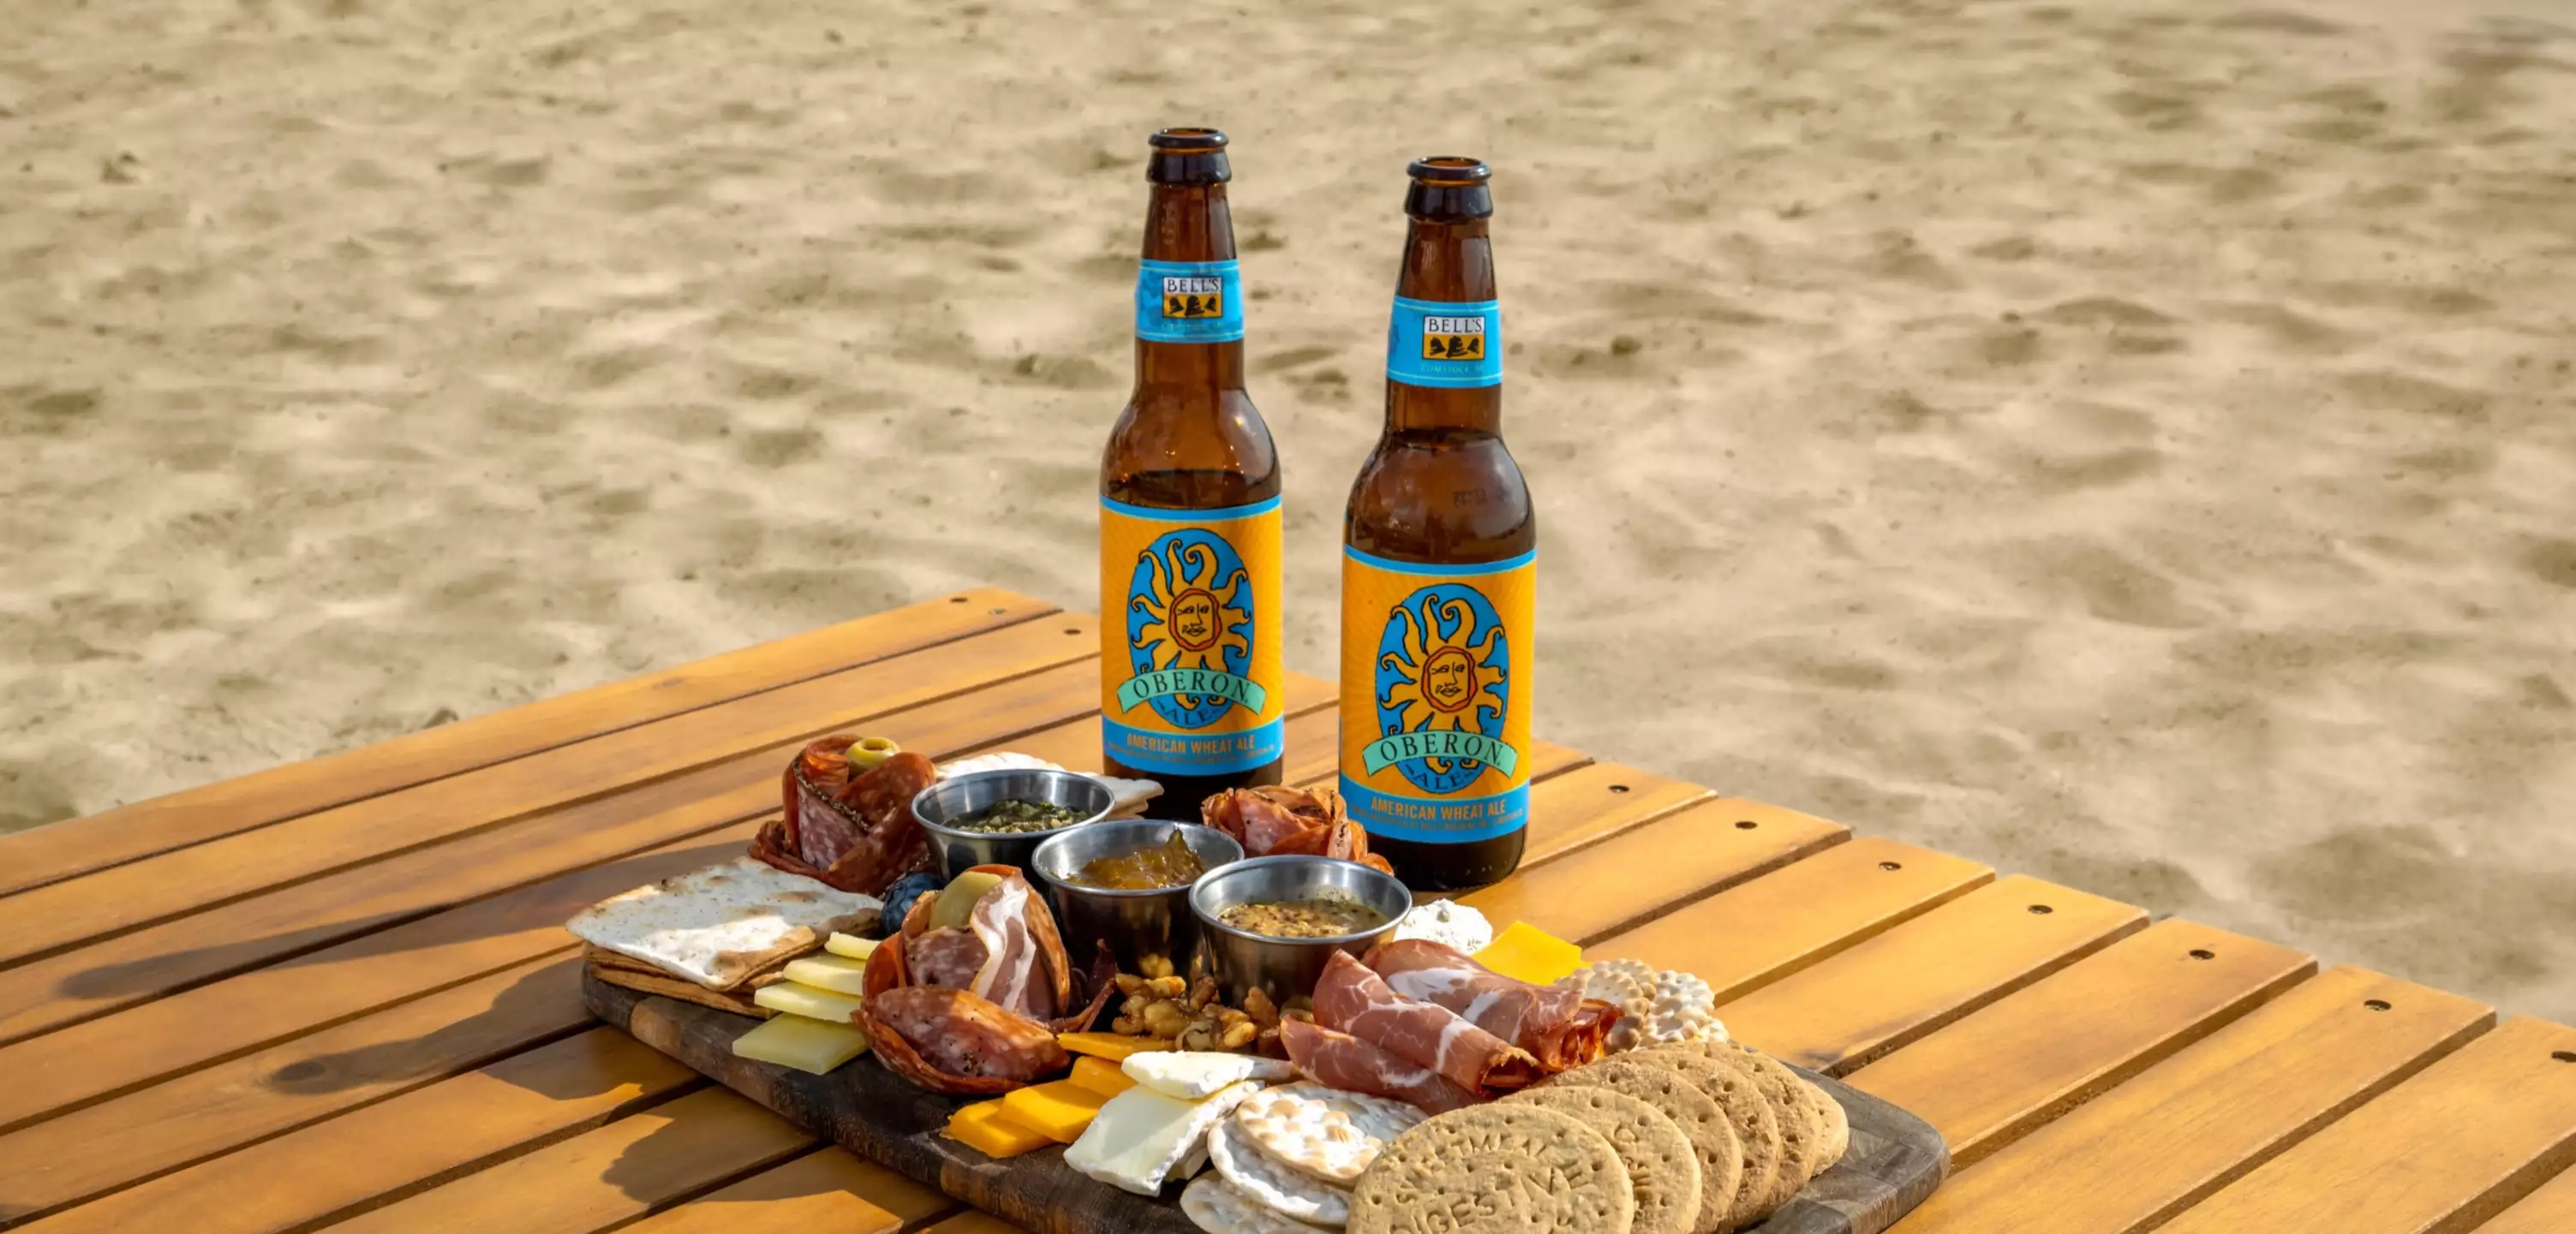 Brews and charcuterie on the beach